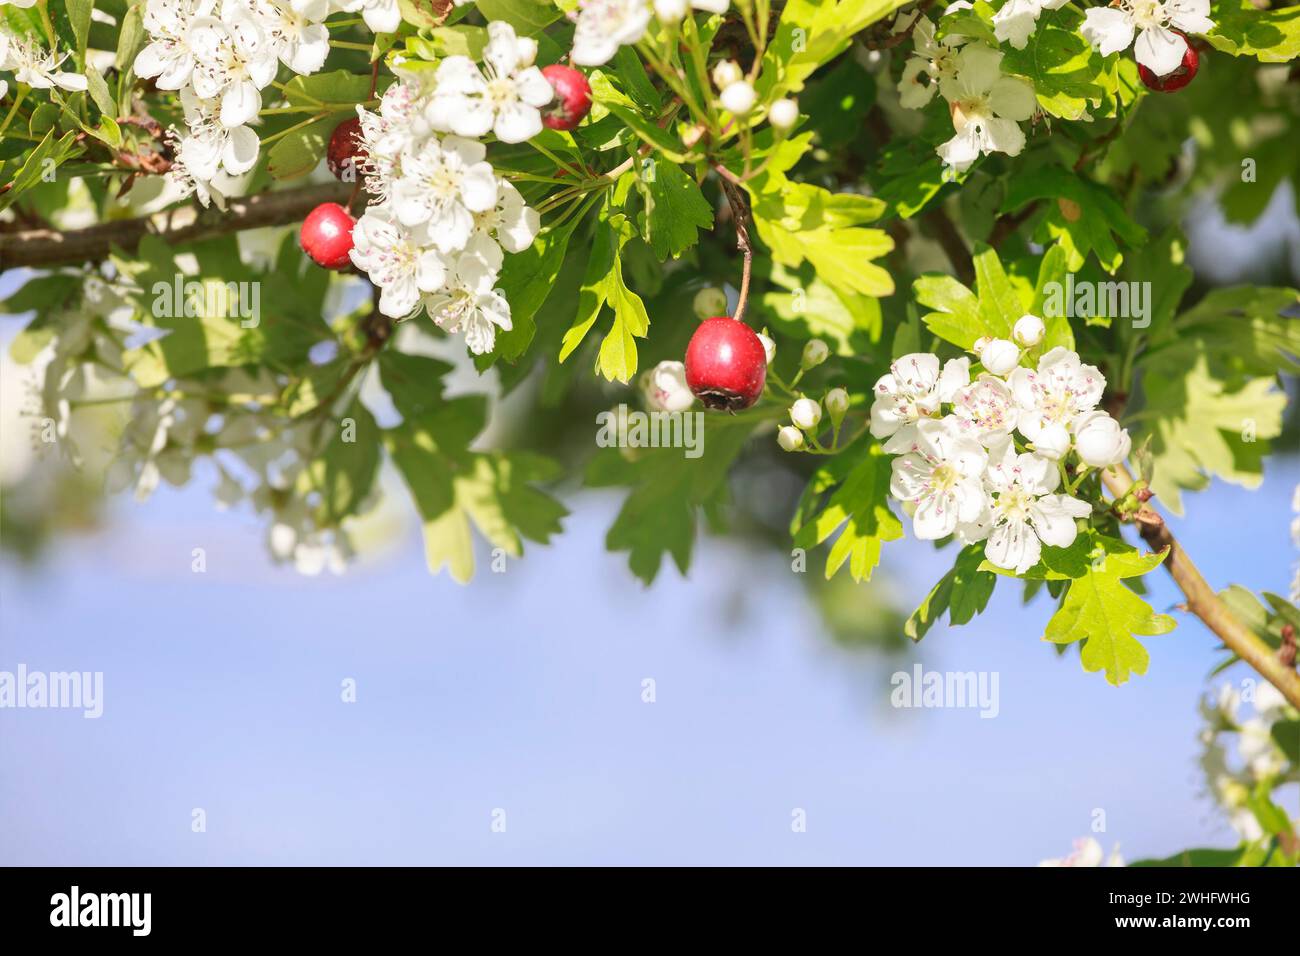 Hawthorn tree with berries and flowers Stock Photo